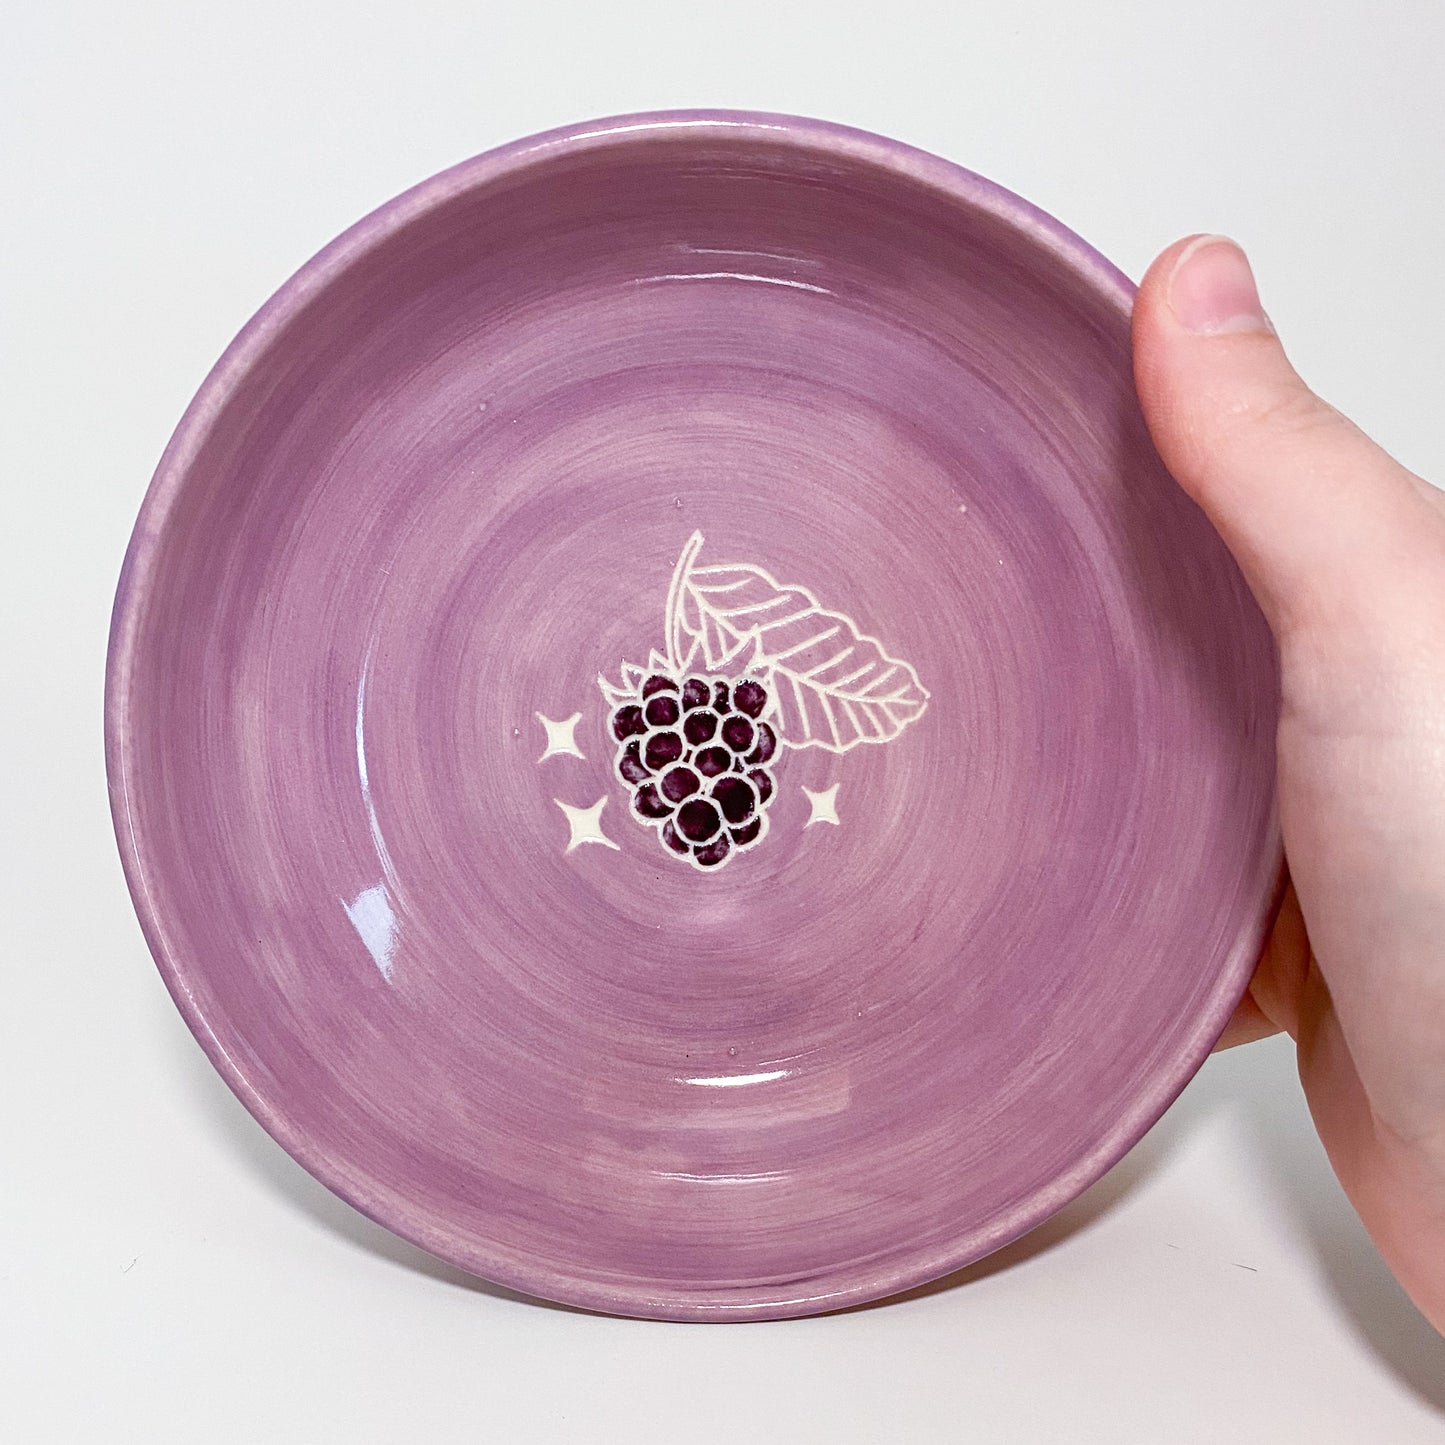 Berry/Cloud Plates - Made to Order (read description)